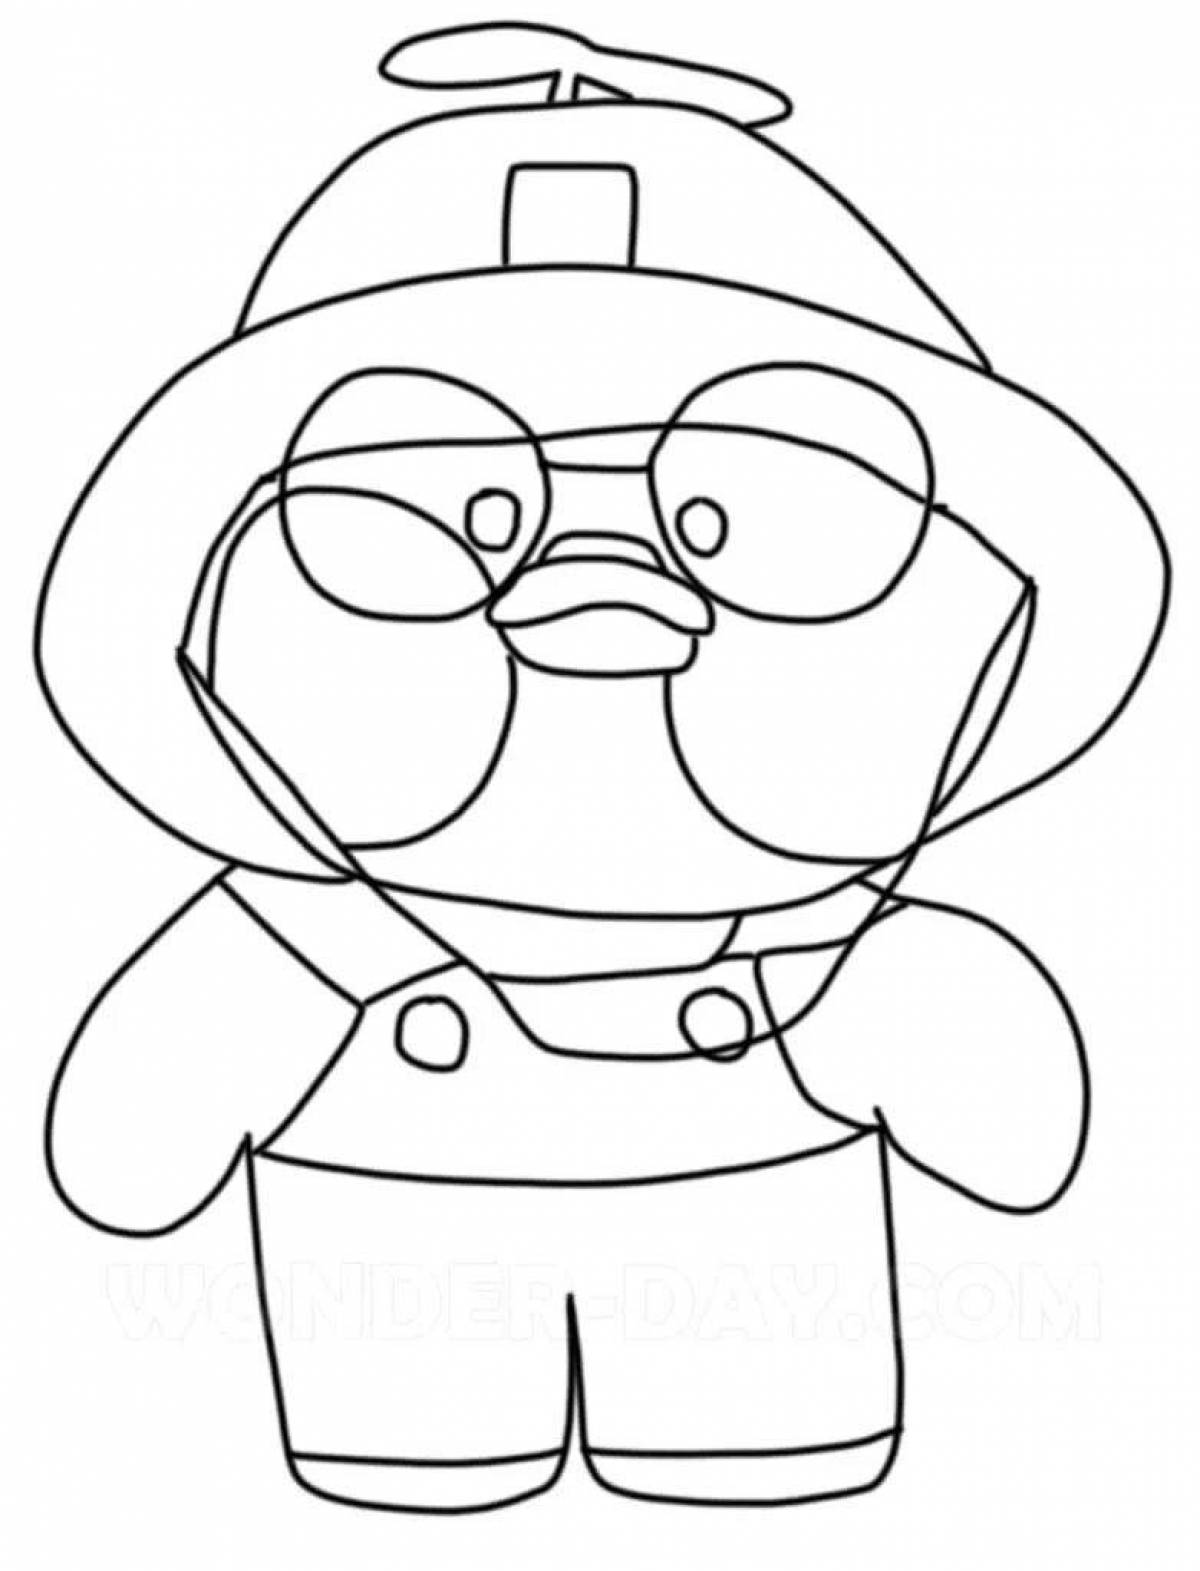 Coloring page adorable lalaphan fan